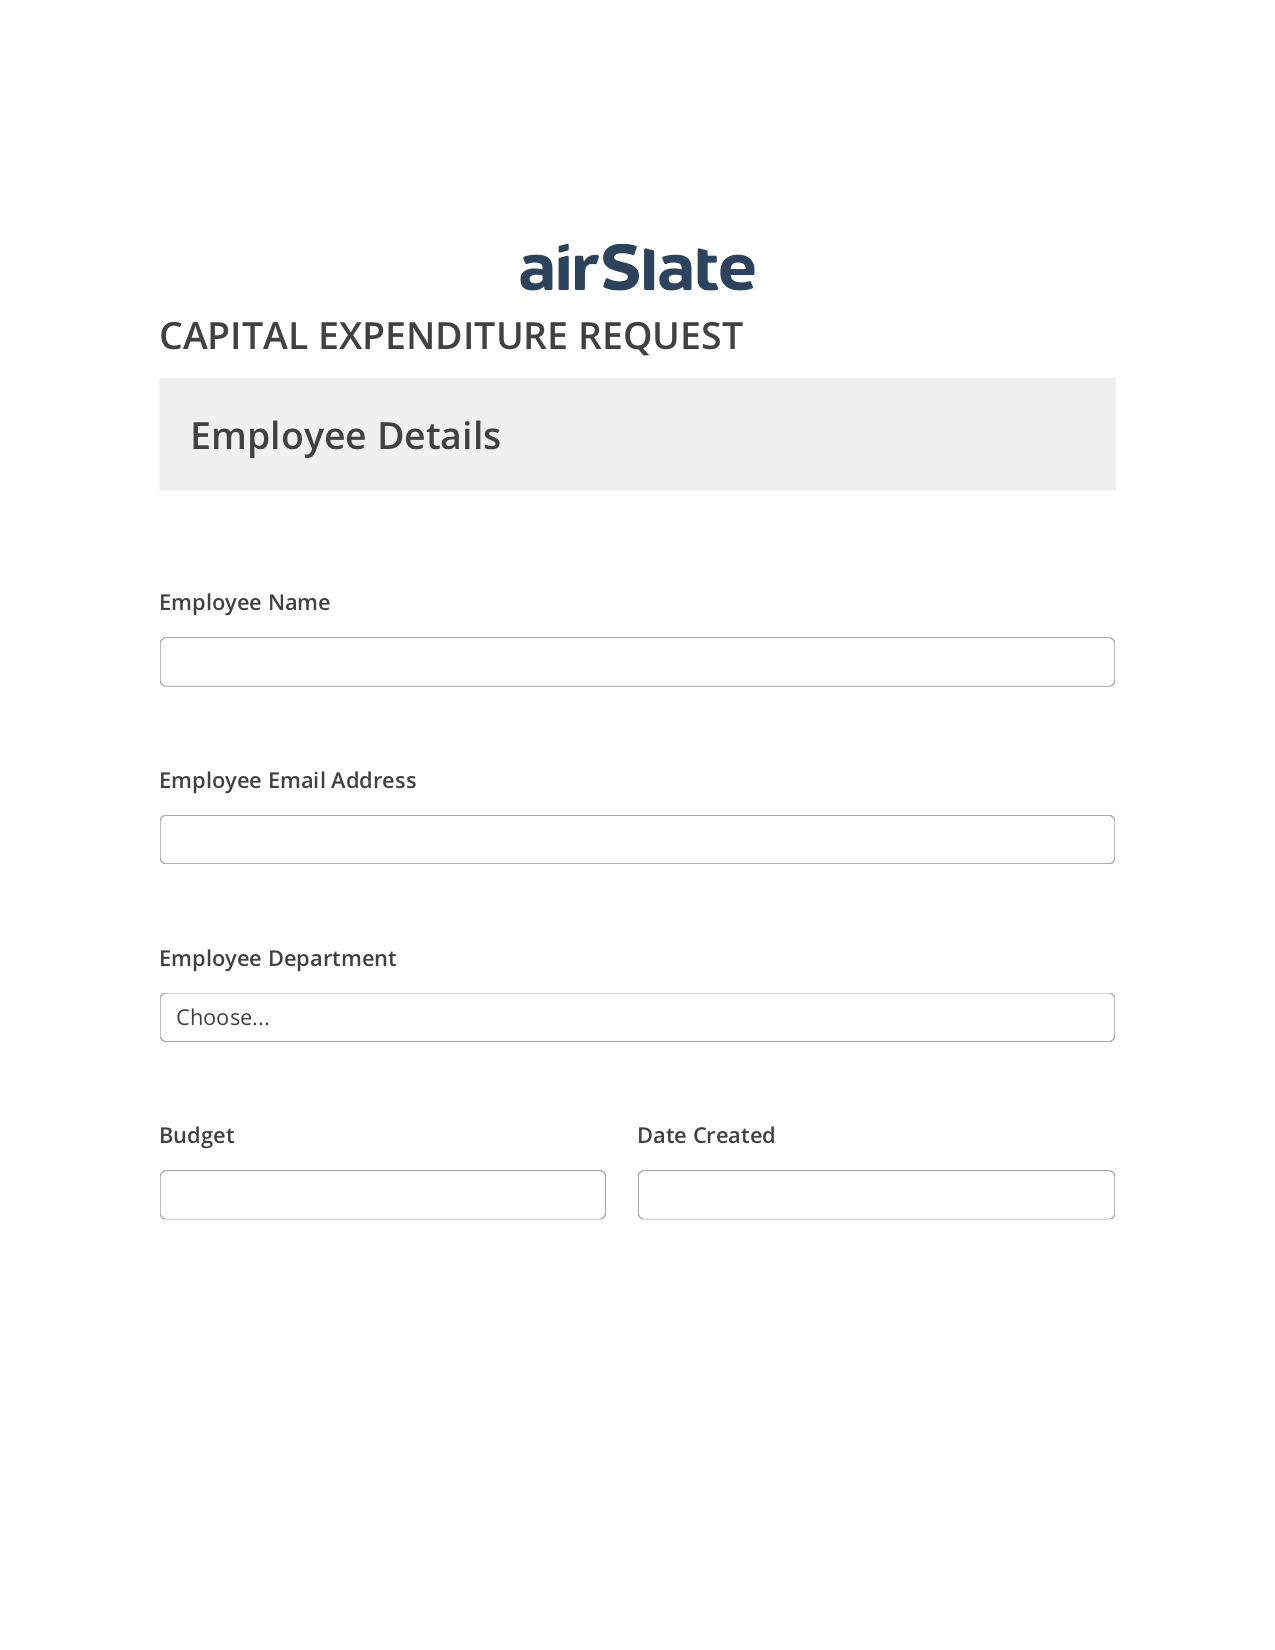 Capital Expenditure Request Approval Workflow Pre-fill from Office 365 Excel Bot, Lock the Slate Bot, Export to NetSuite